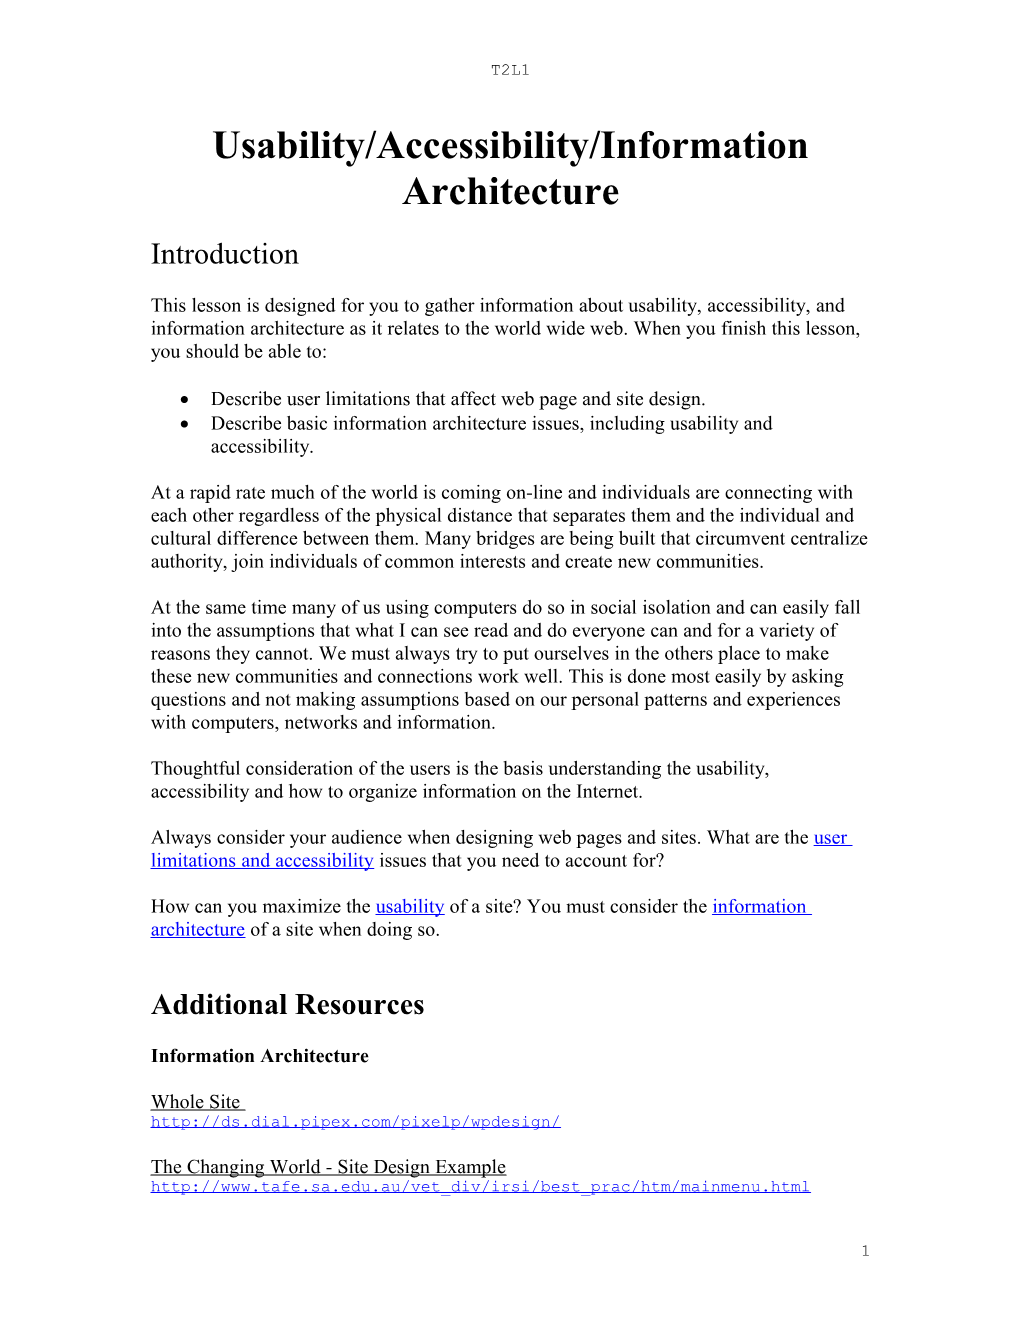 Usability/Accessibility/Information Architechture